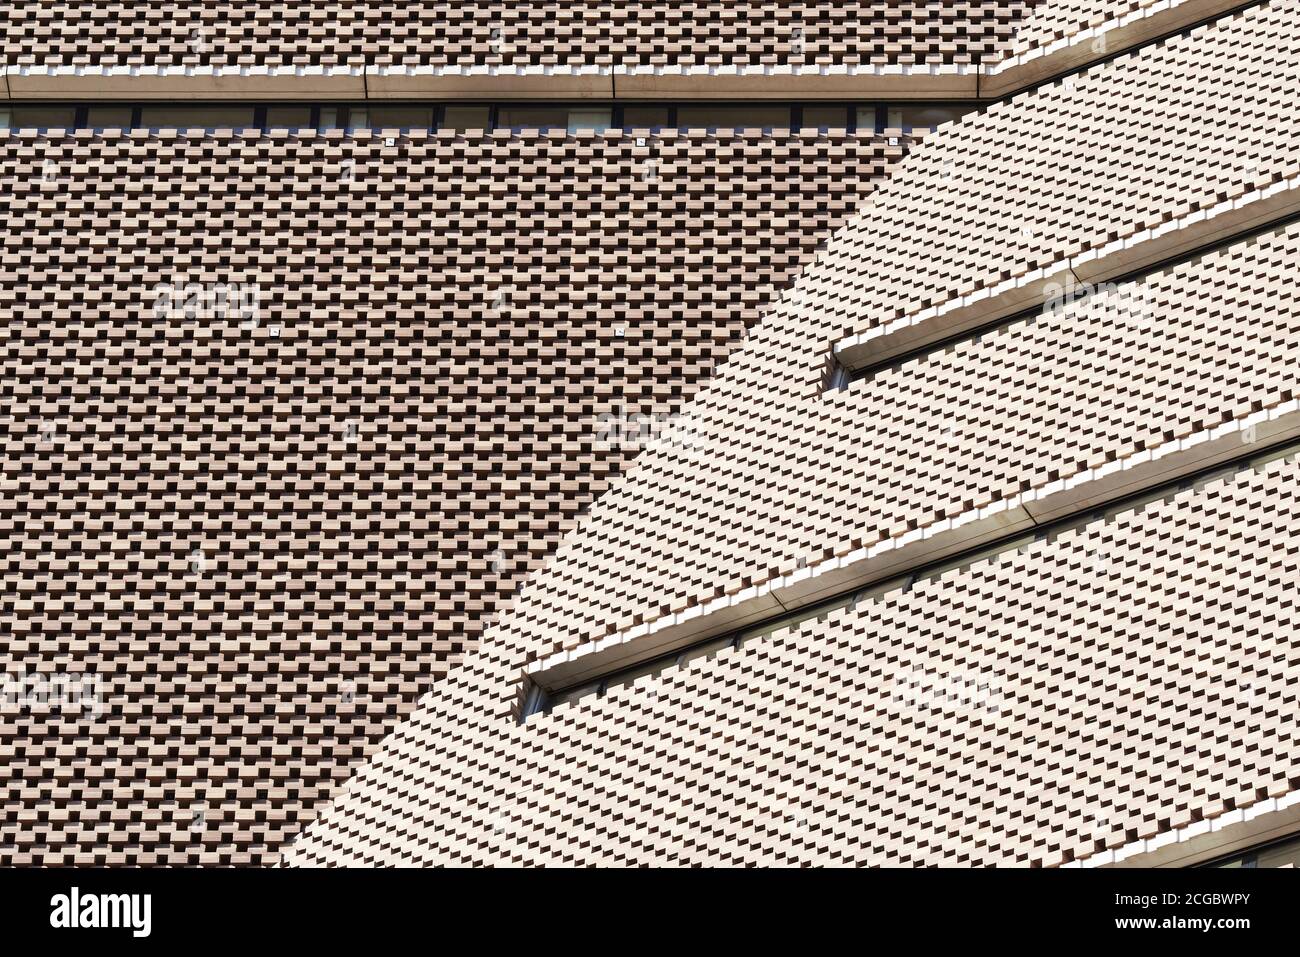 Exterior detail of Blavatnik Building (formerly known as Switch House) Tate Modern, London UK. Designed by architects Herzog & de Meuron. Completed in 2016. Stock Photo